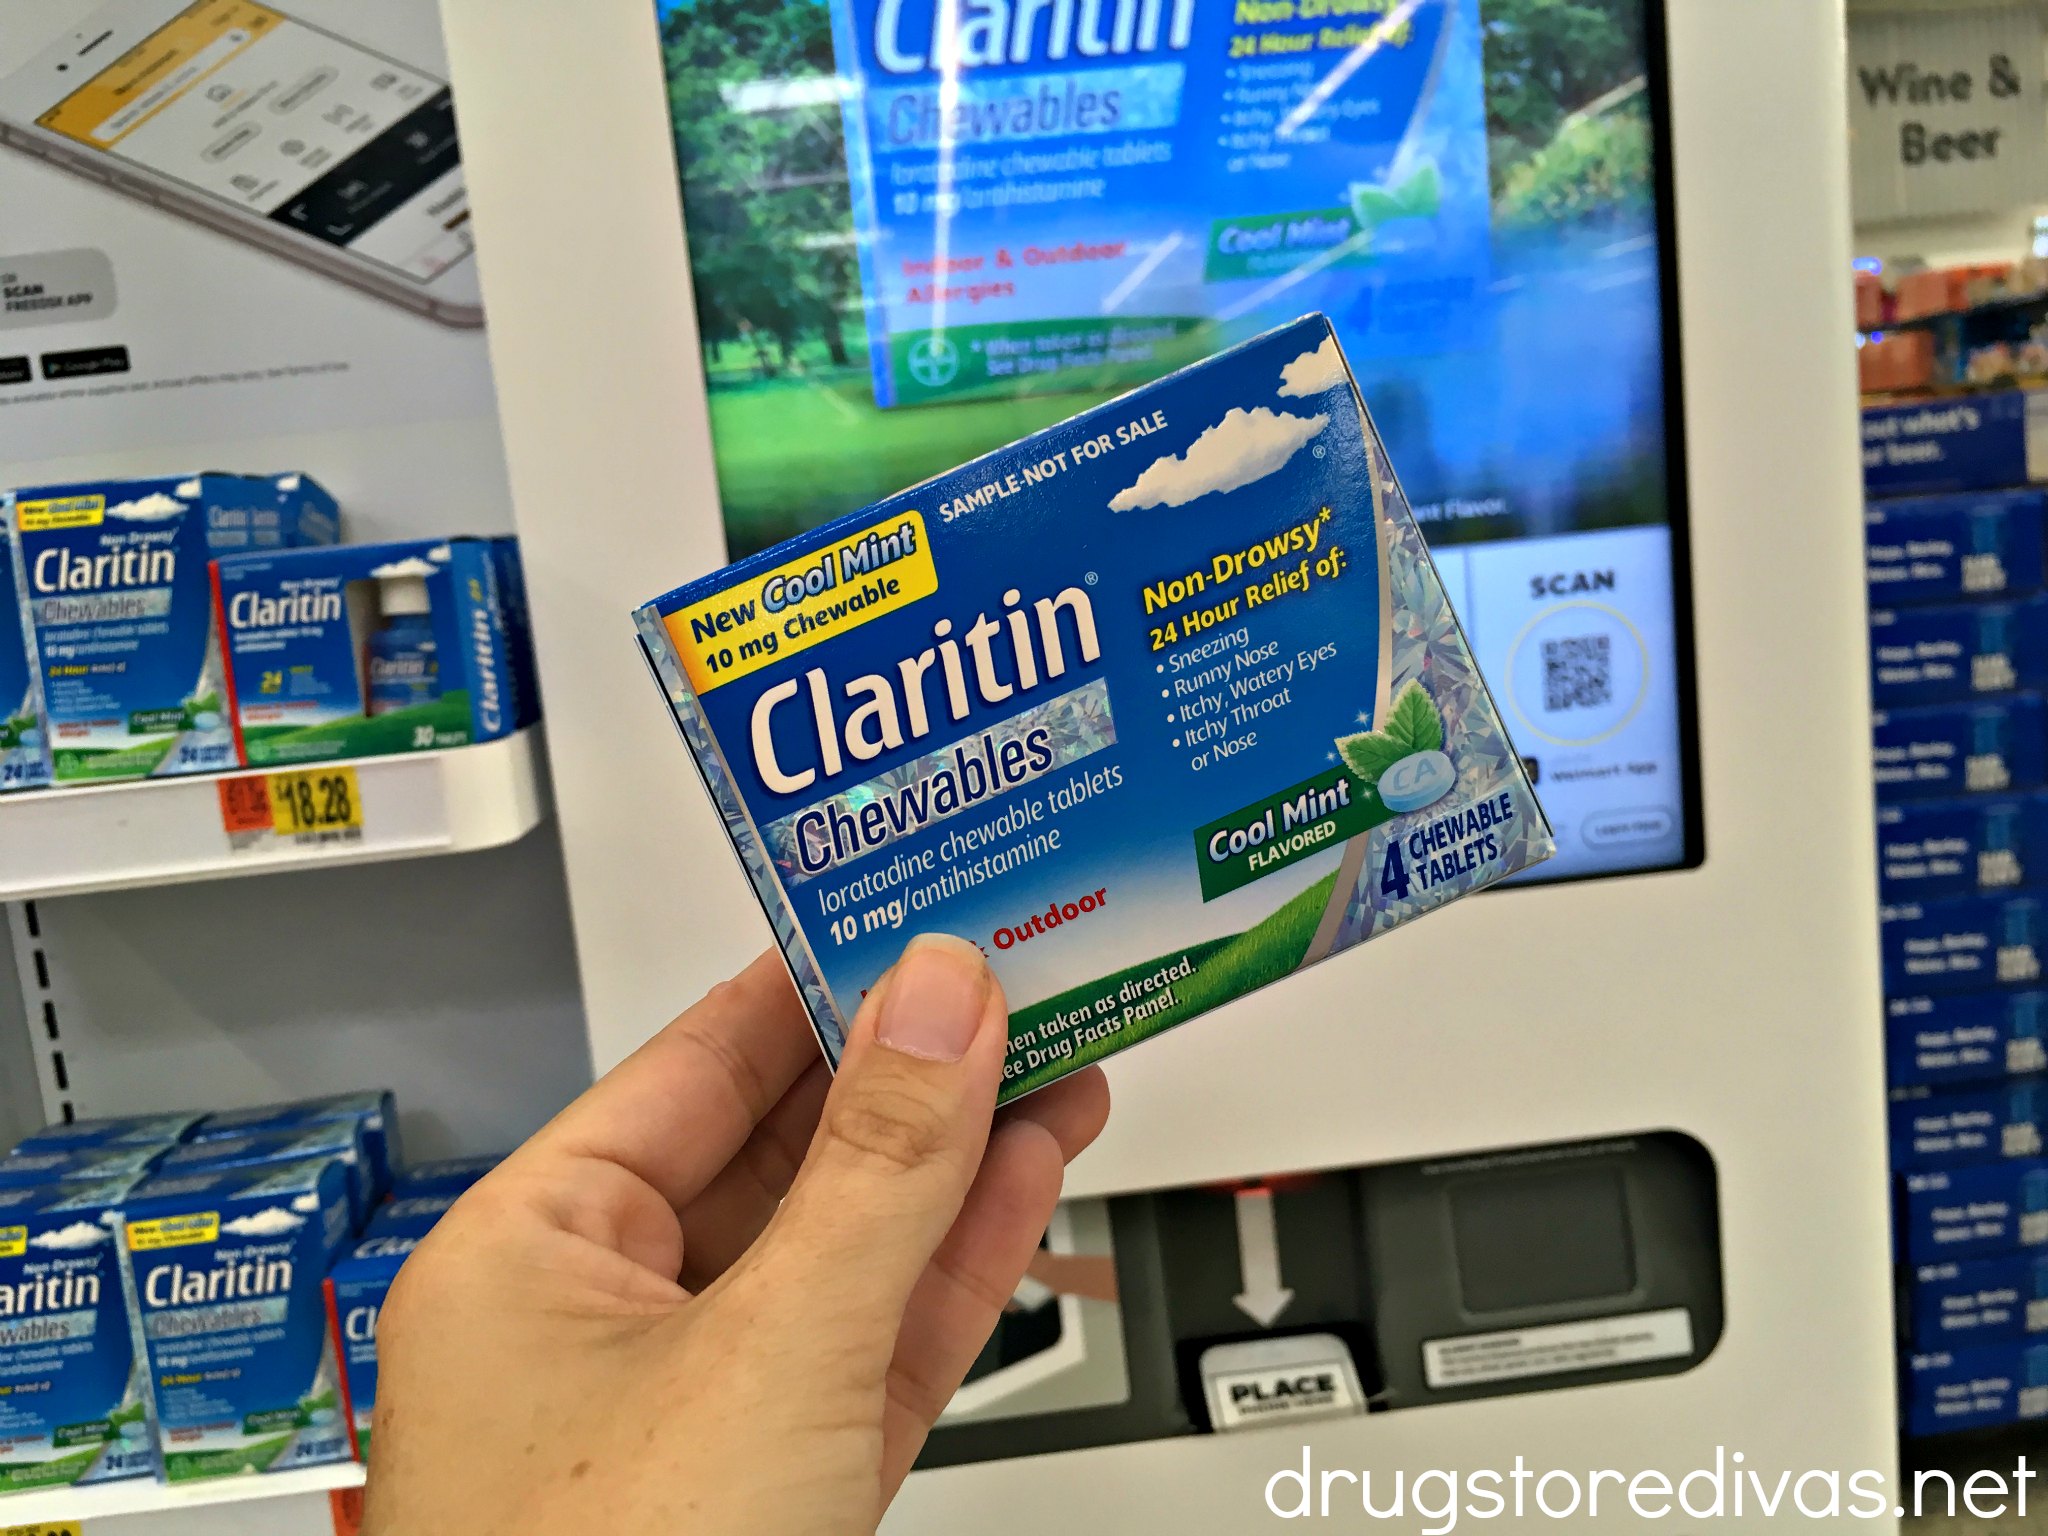 Claritin Chewables in front of the Freeosk machine.